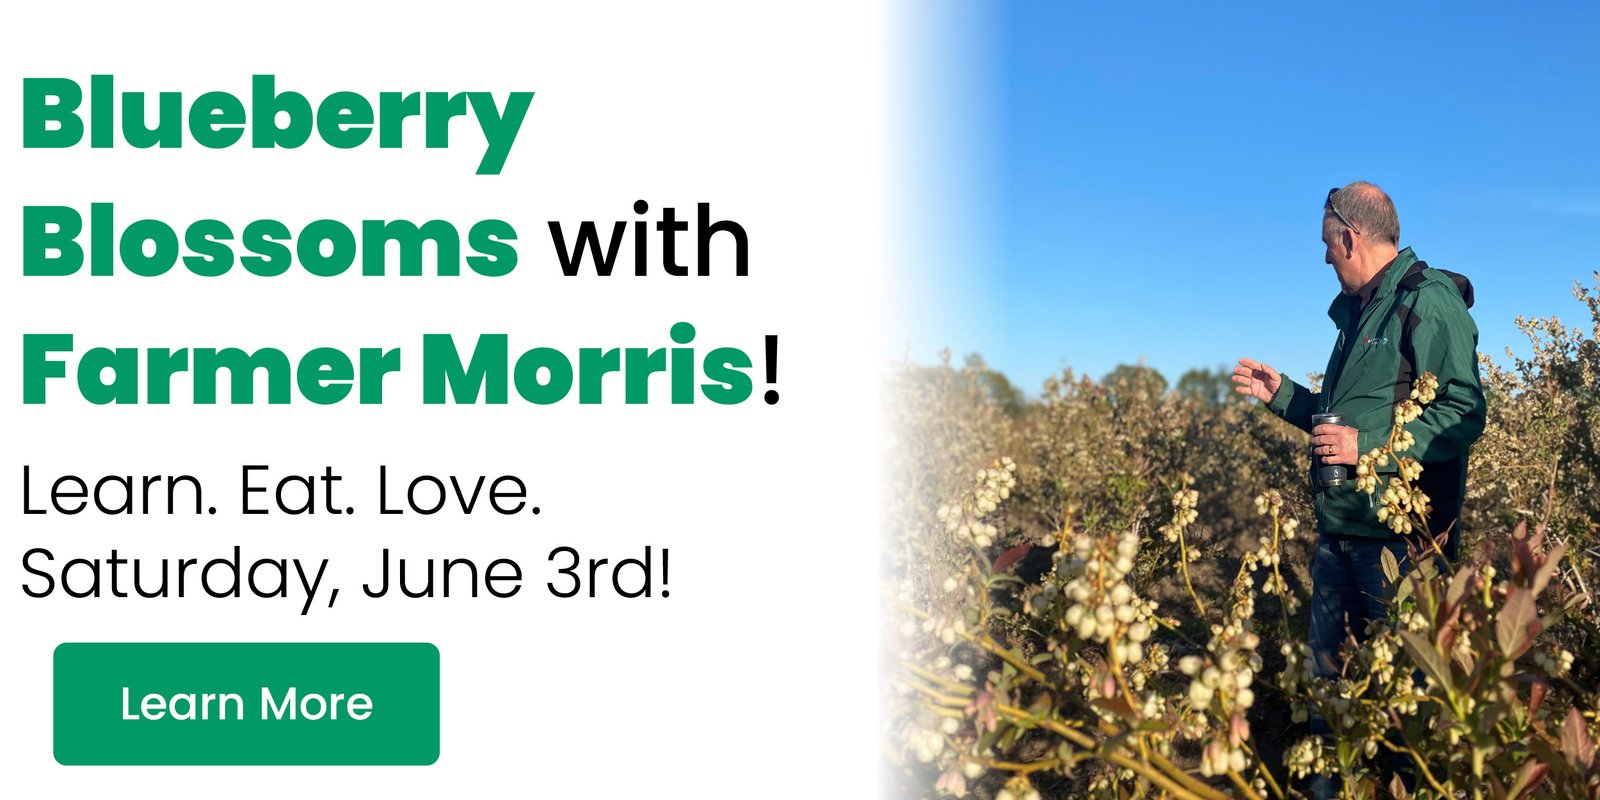 Blueberry Blossoms with Farmer Morris Event